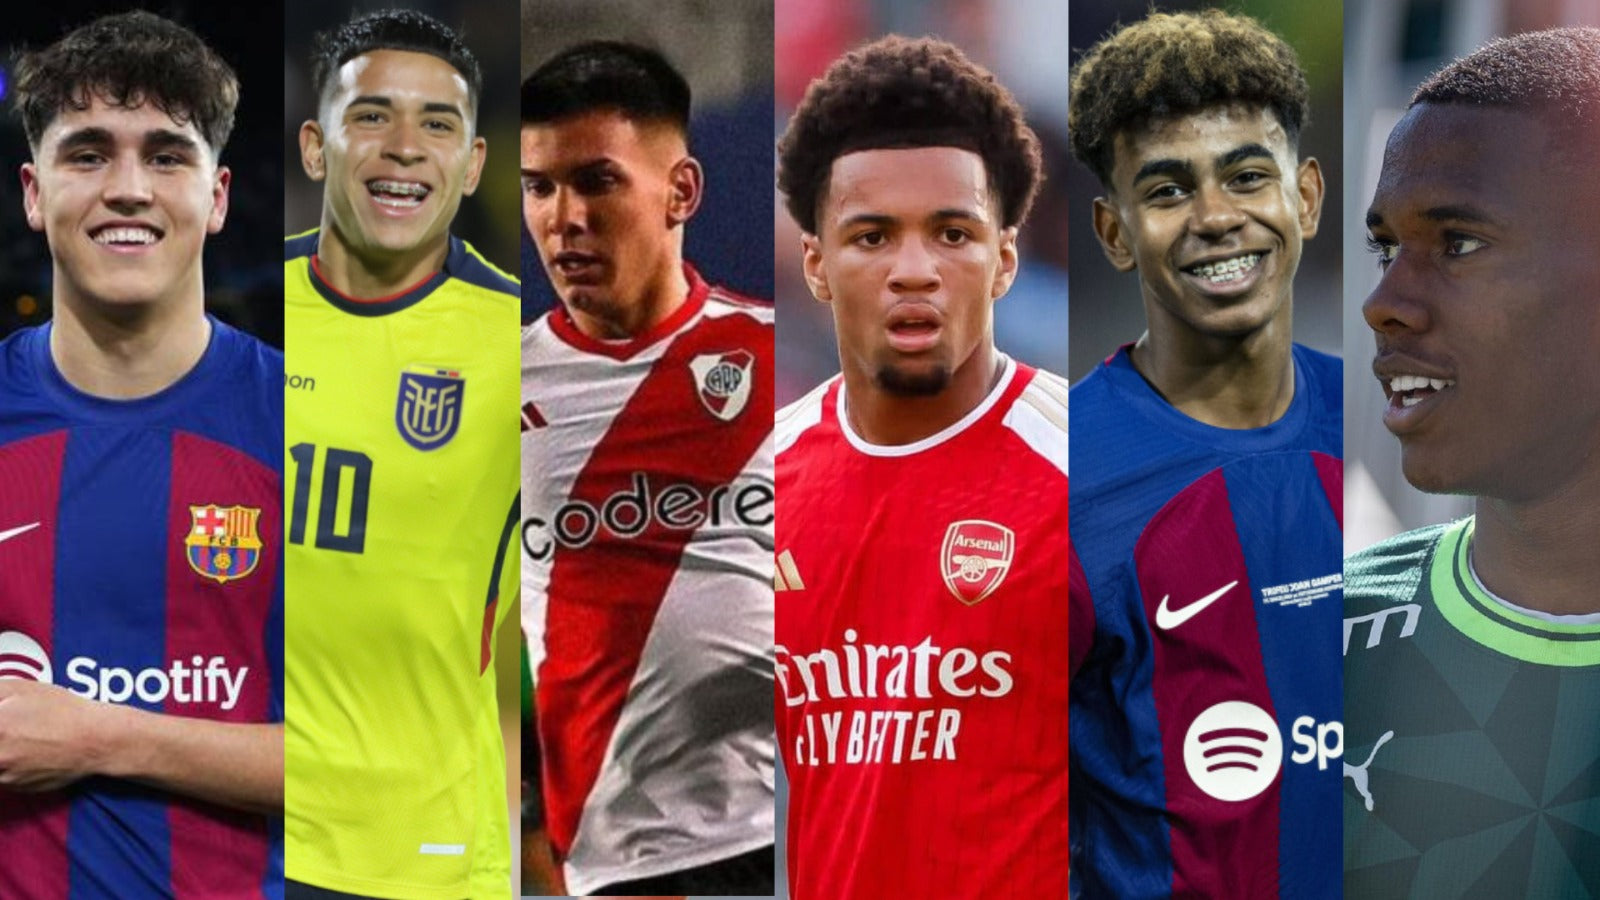 The 2007-born talents set to dominate world soccer